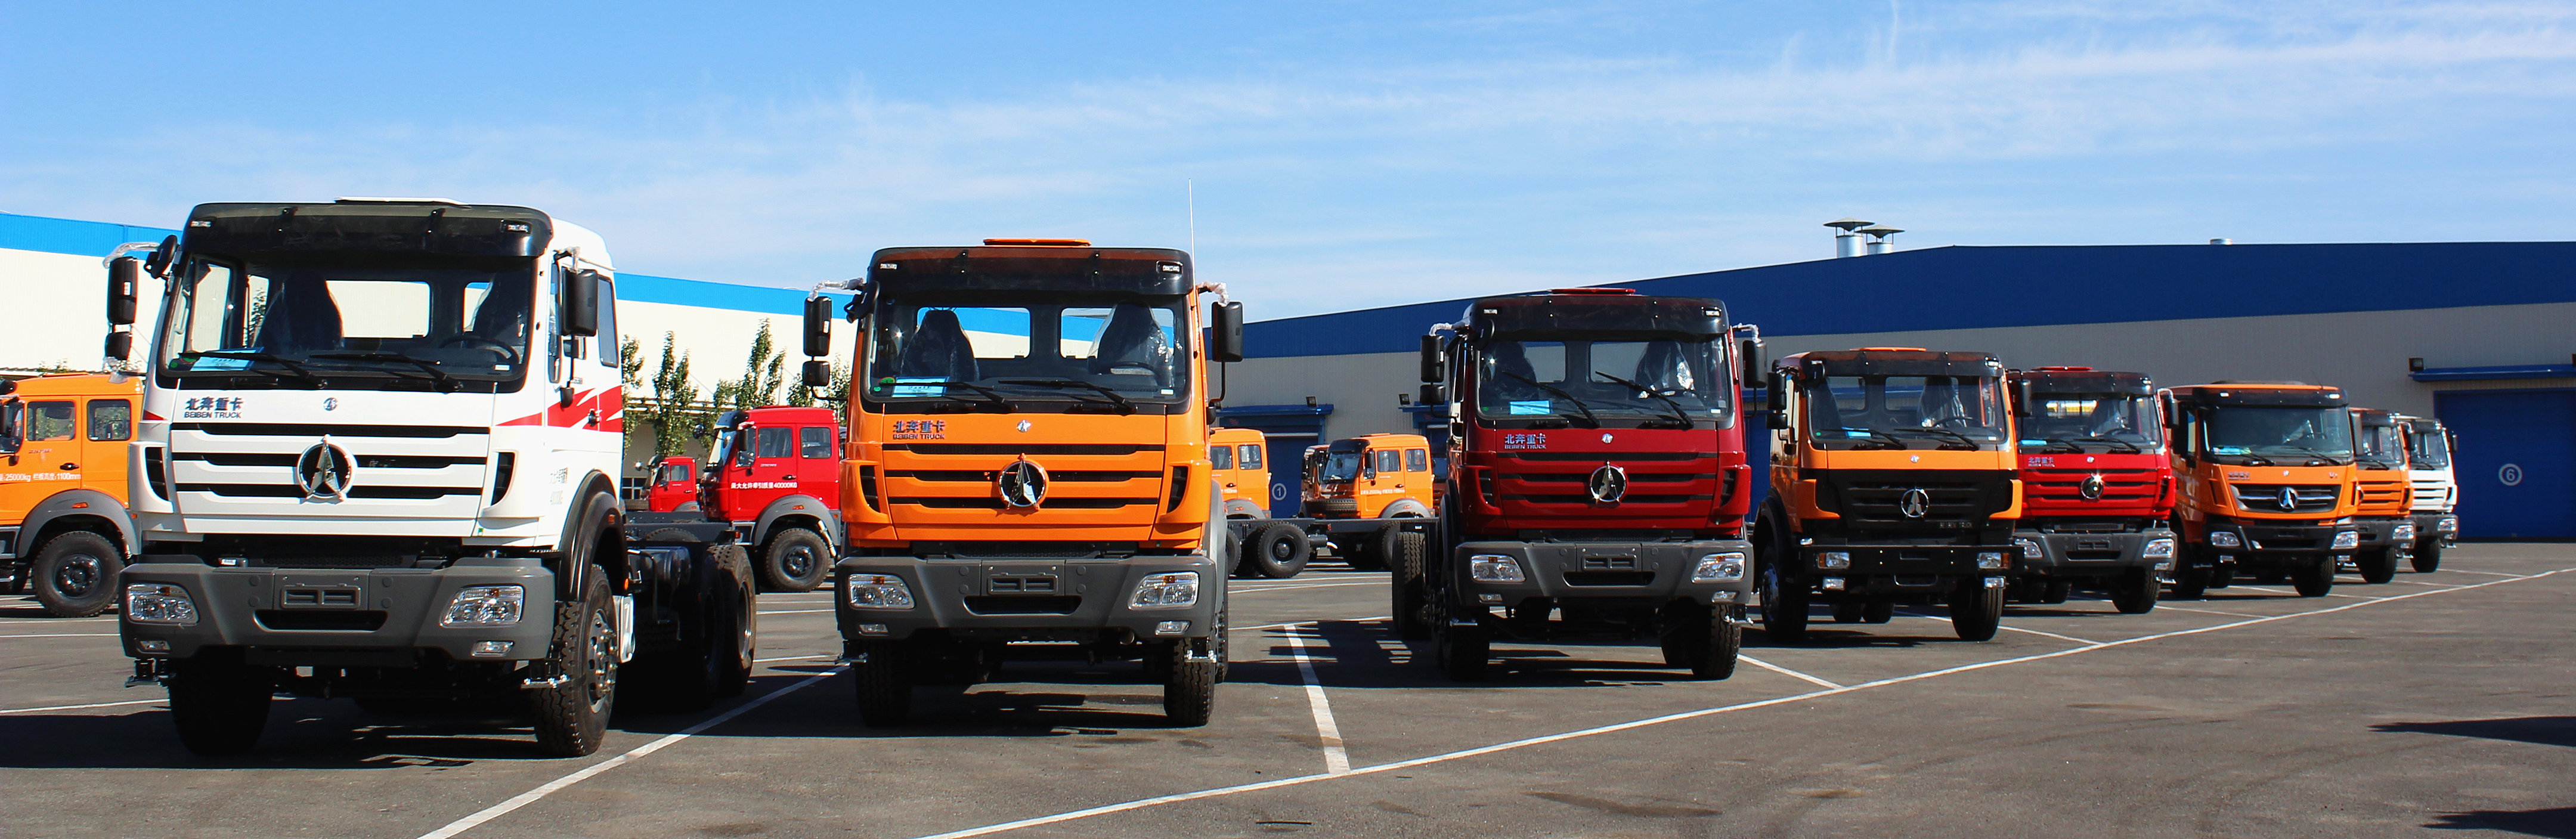 Beiben tractor trucks in factory stock for quick delivery